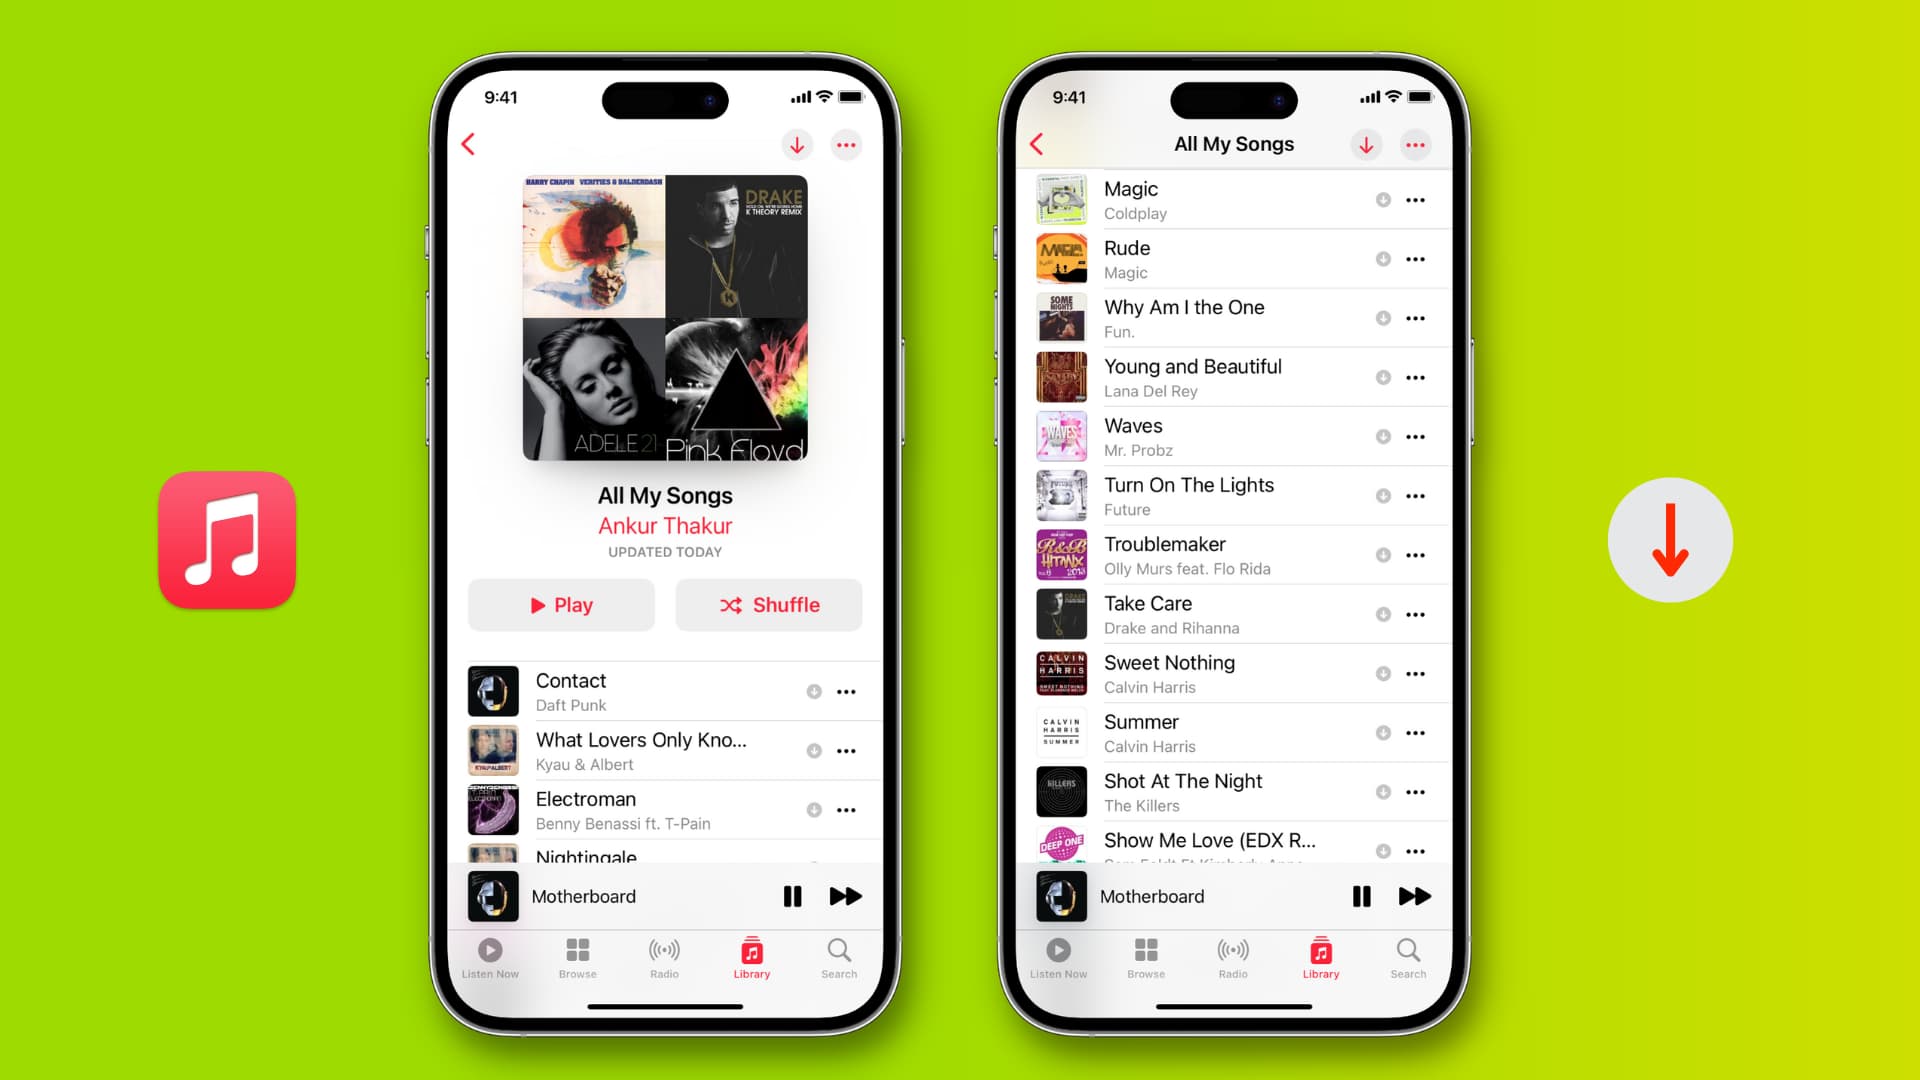 Download all Apple Music songs to your iPhone